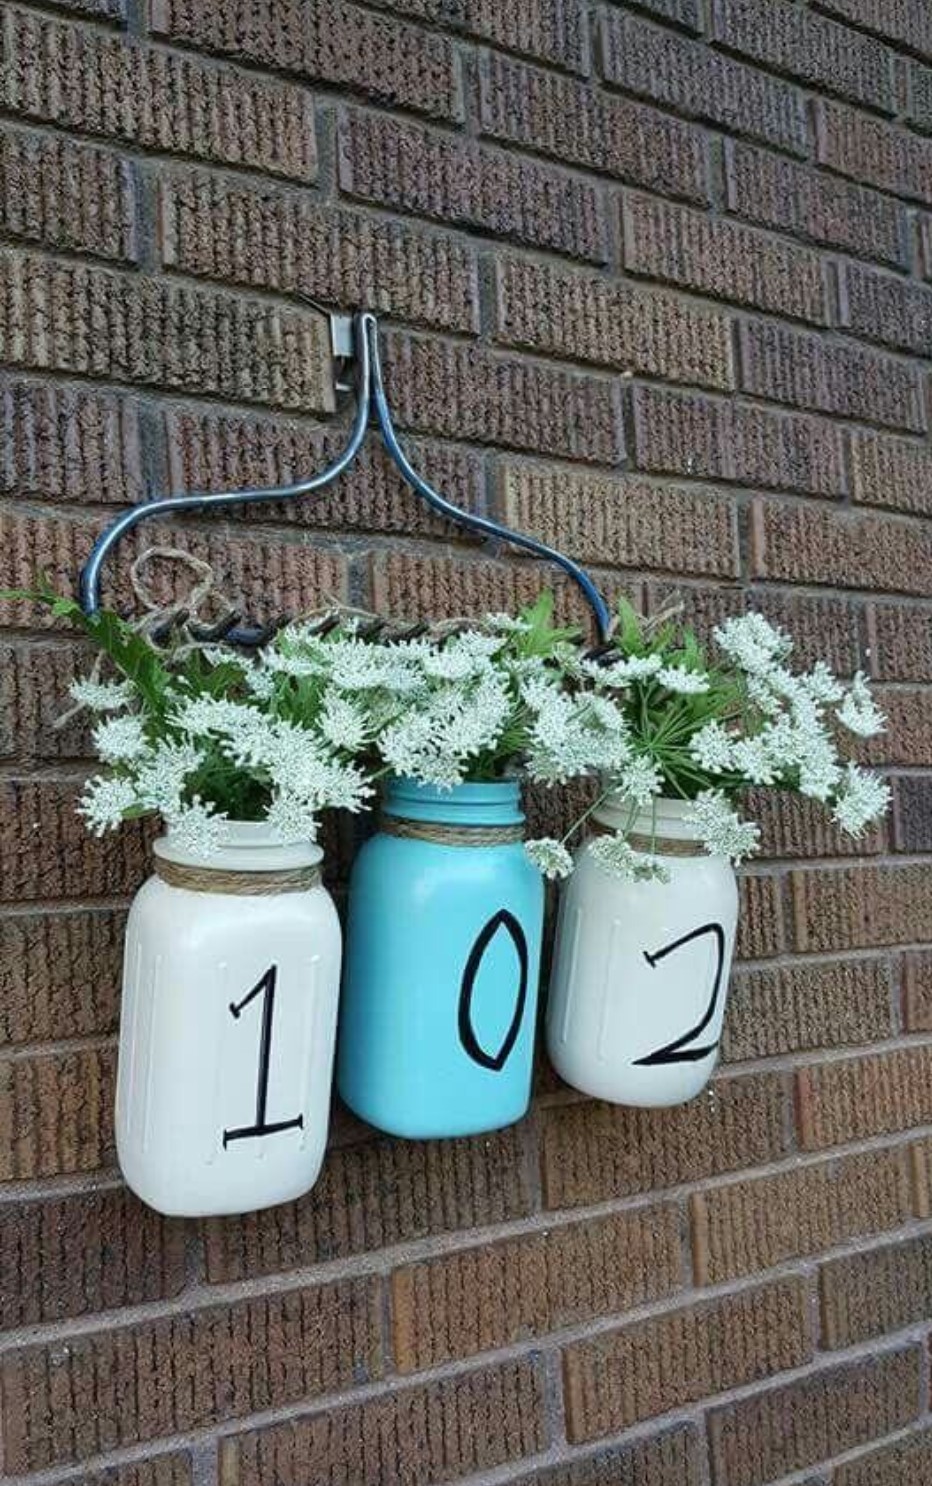 Hanging Milk Bottles with Flowers